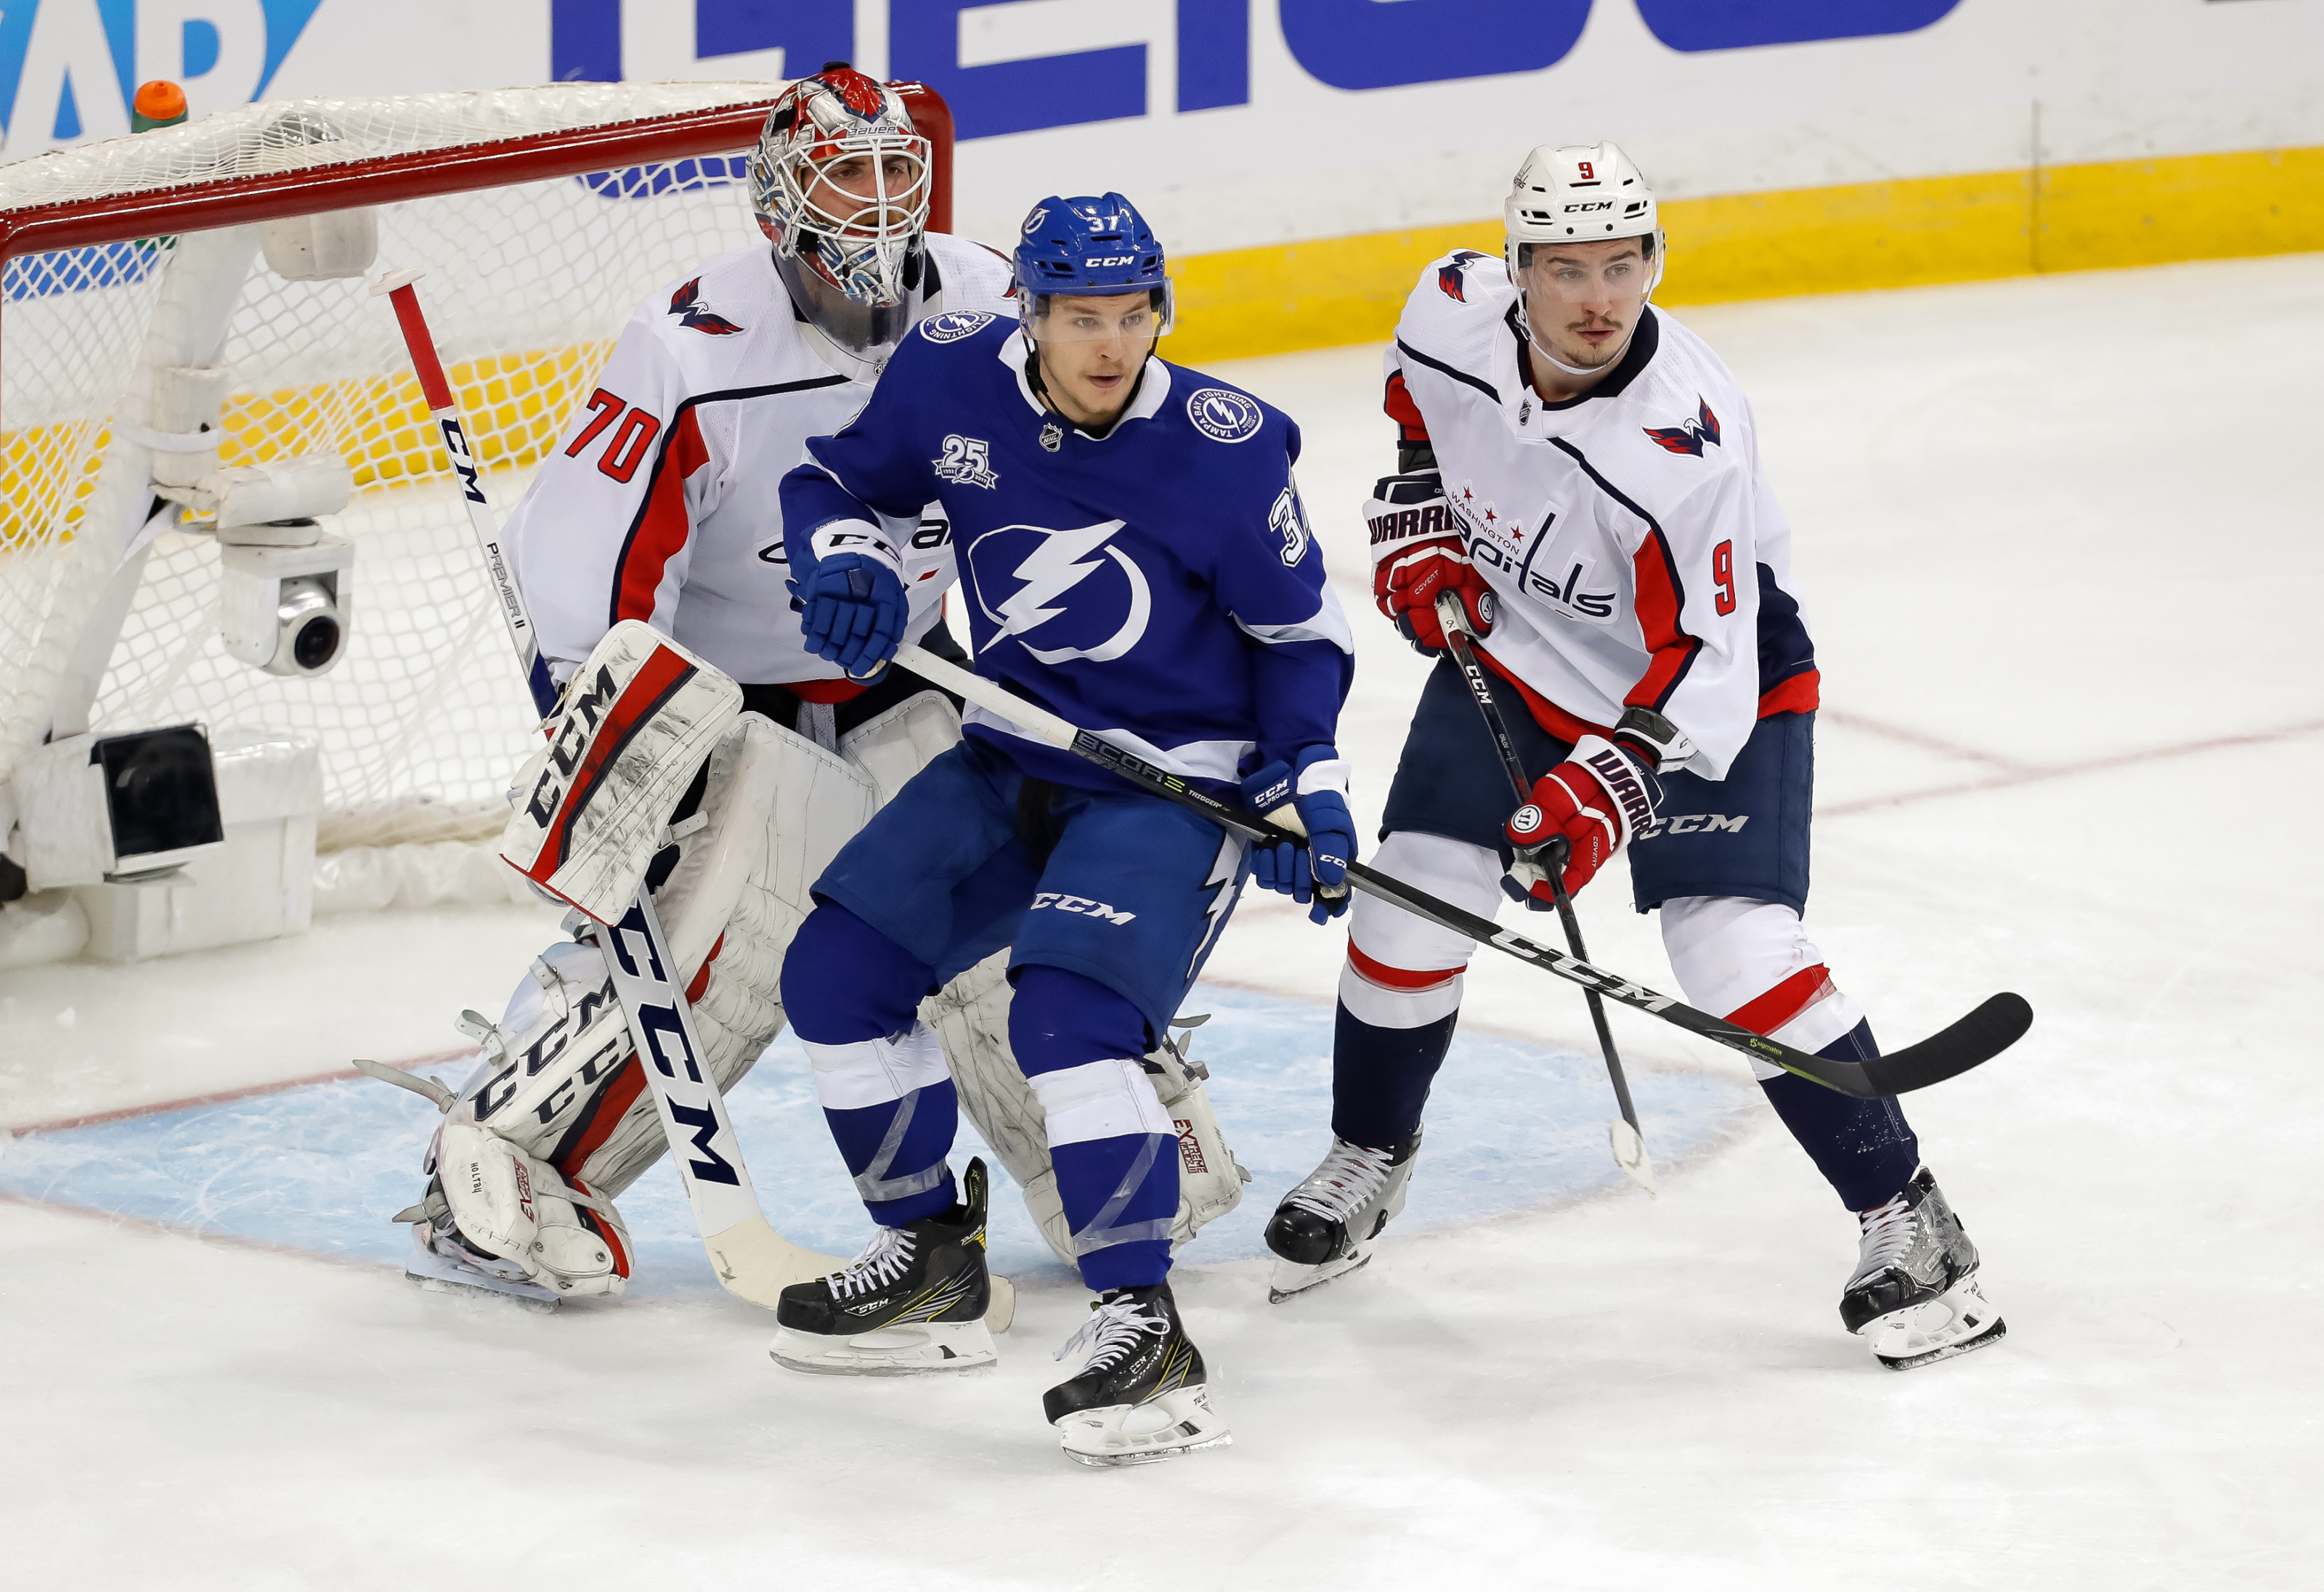 Takeaways from the Tampa Bay Lightning's First Round Elimination